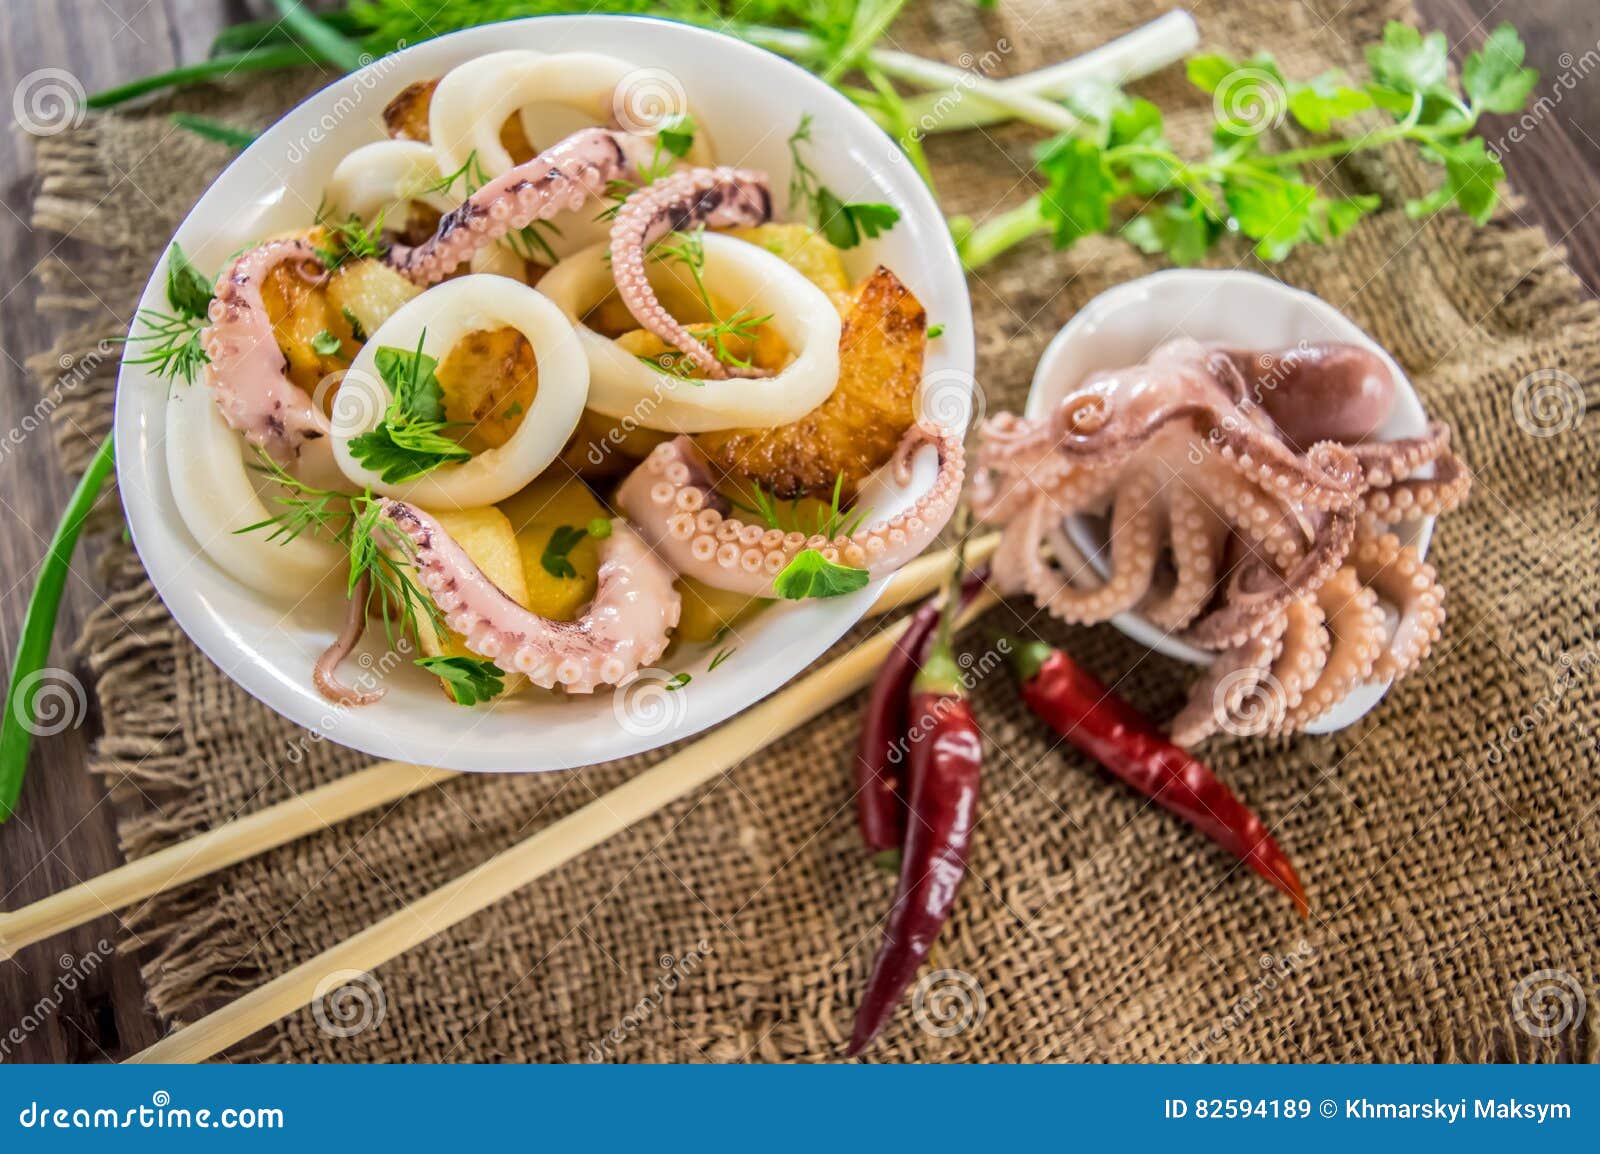 What Is Calamari - Ultimate Guide To This Tasty Seafood Snack